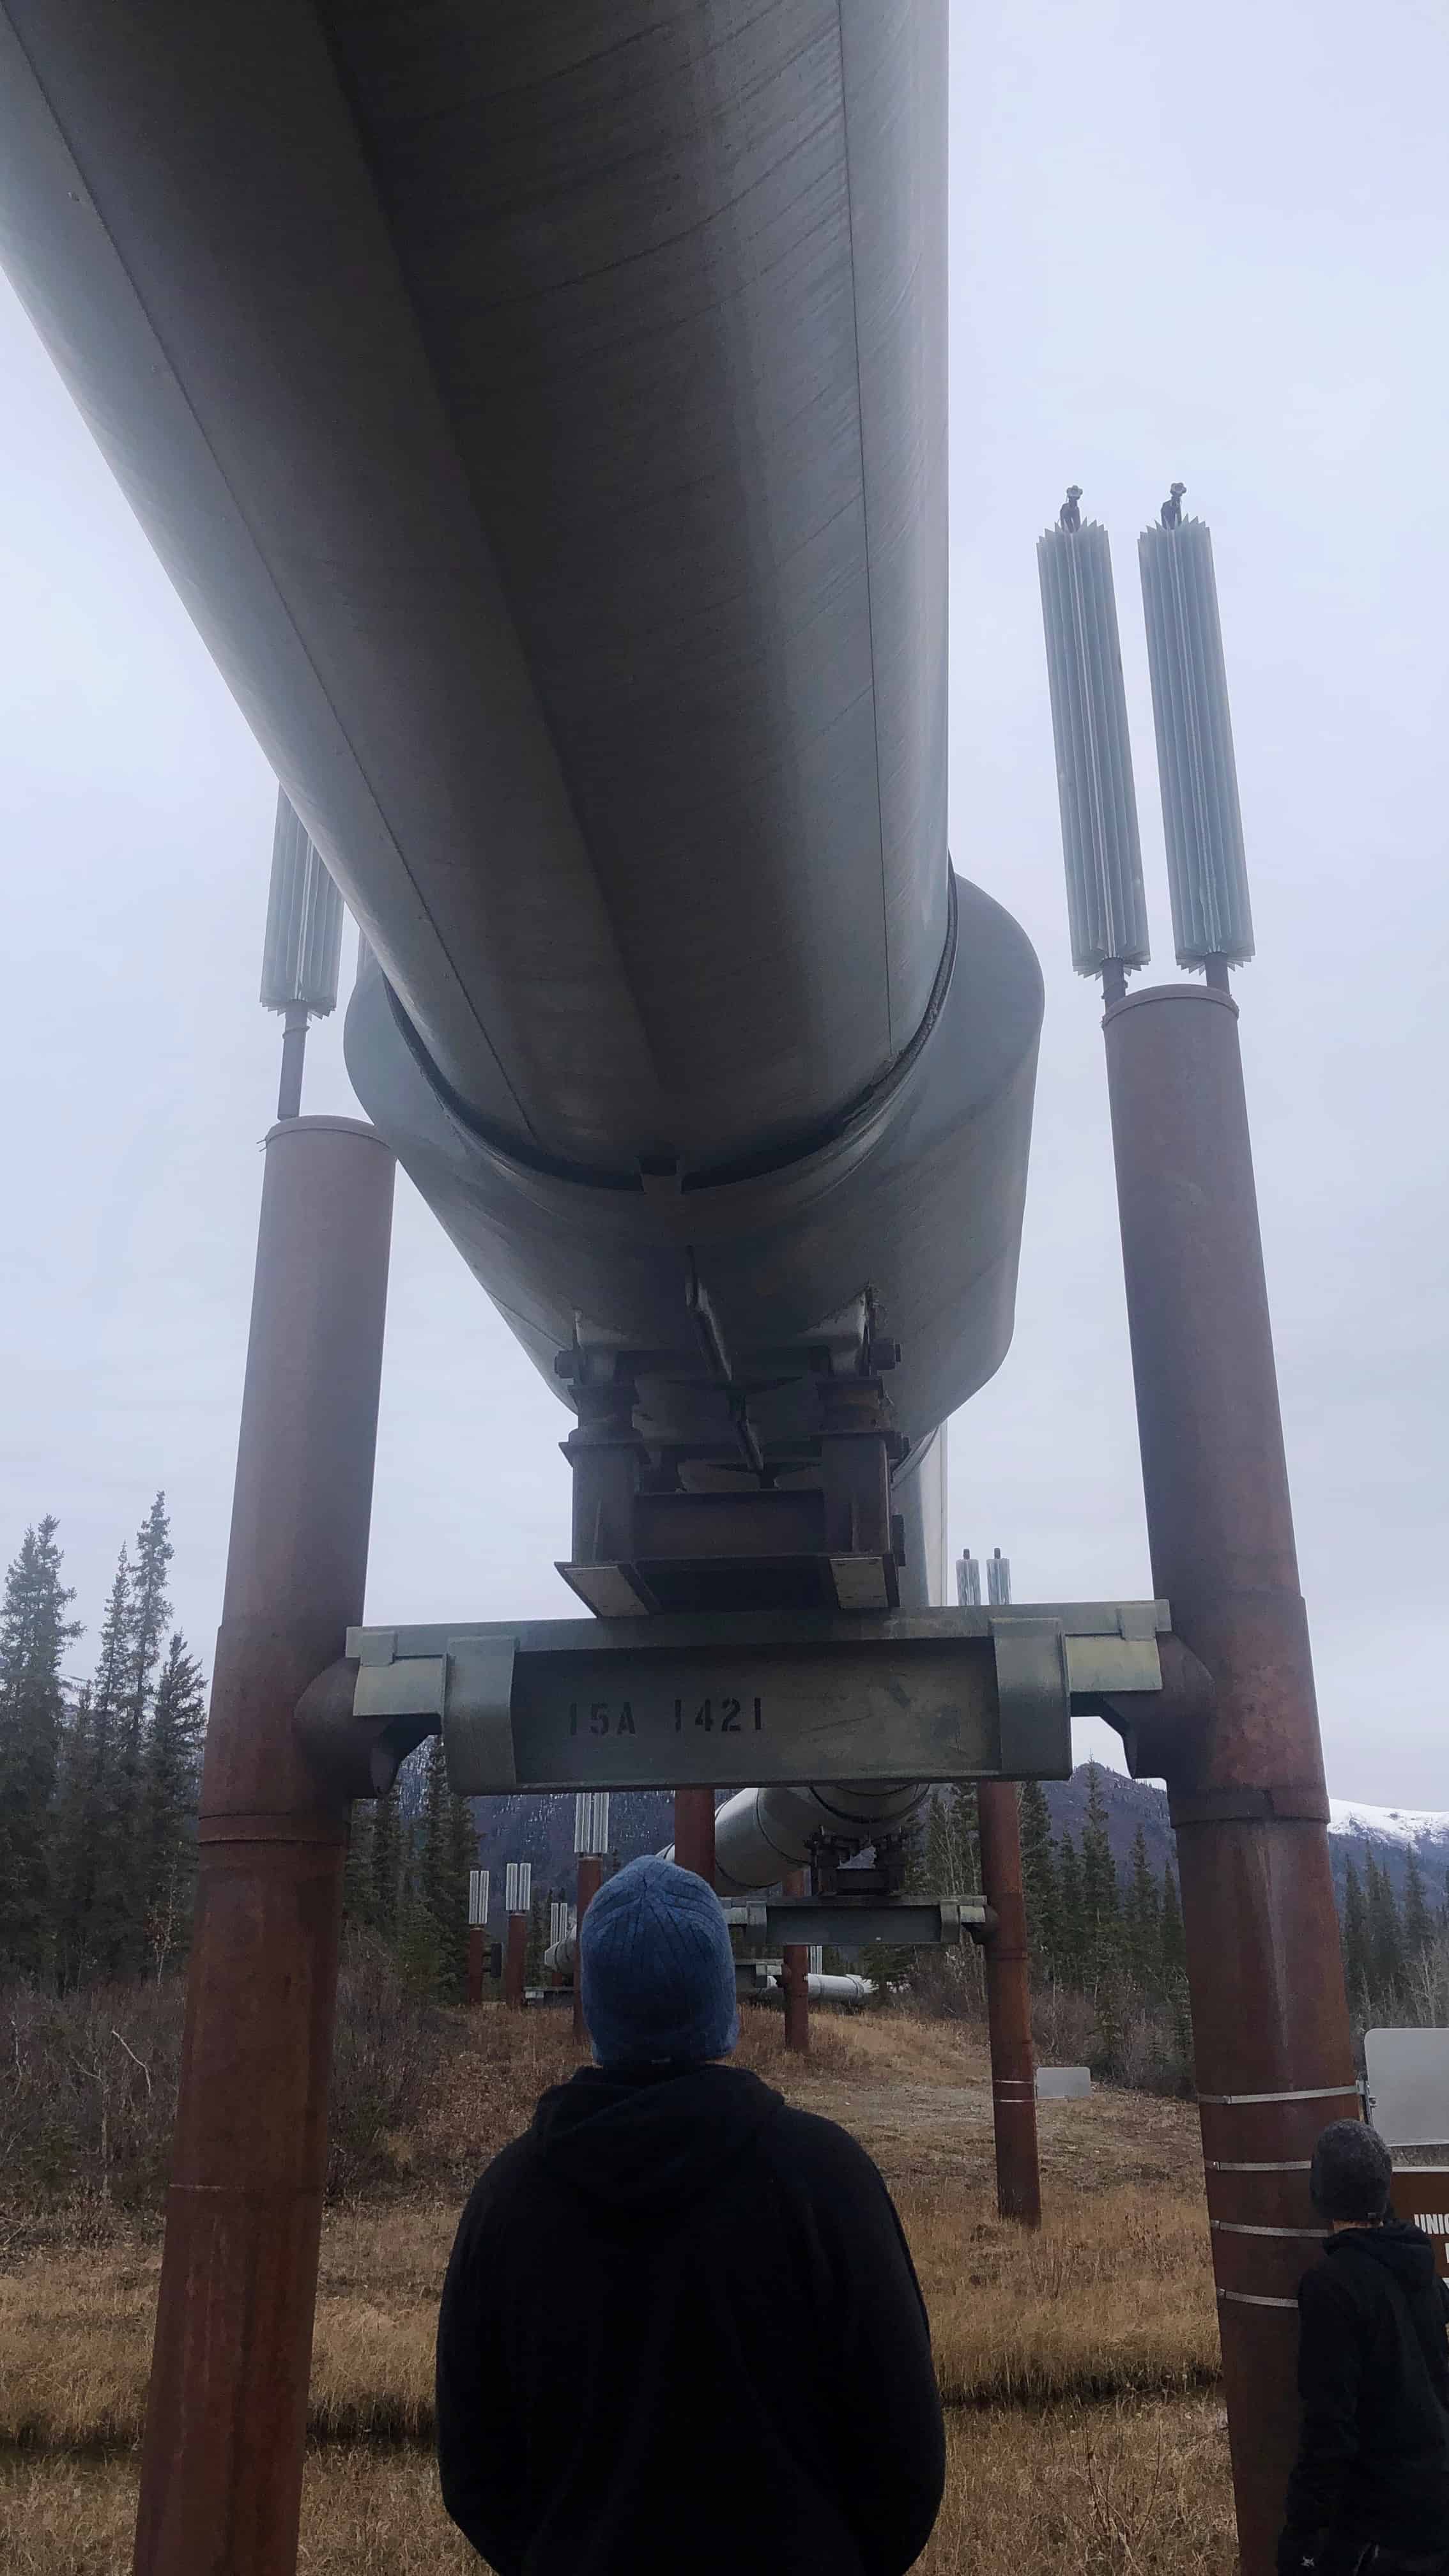 Trans-Alaska Pipeline with perspective